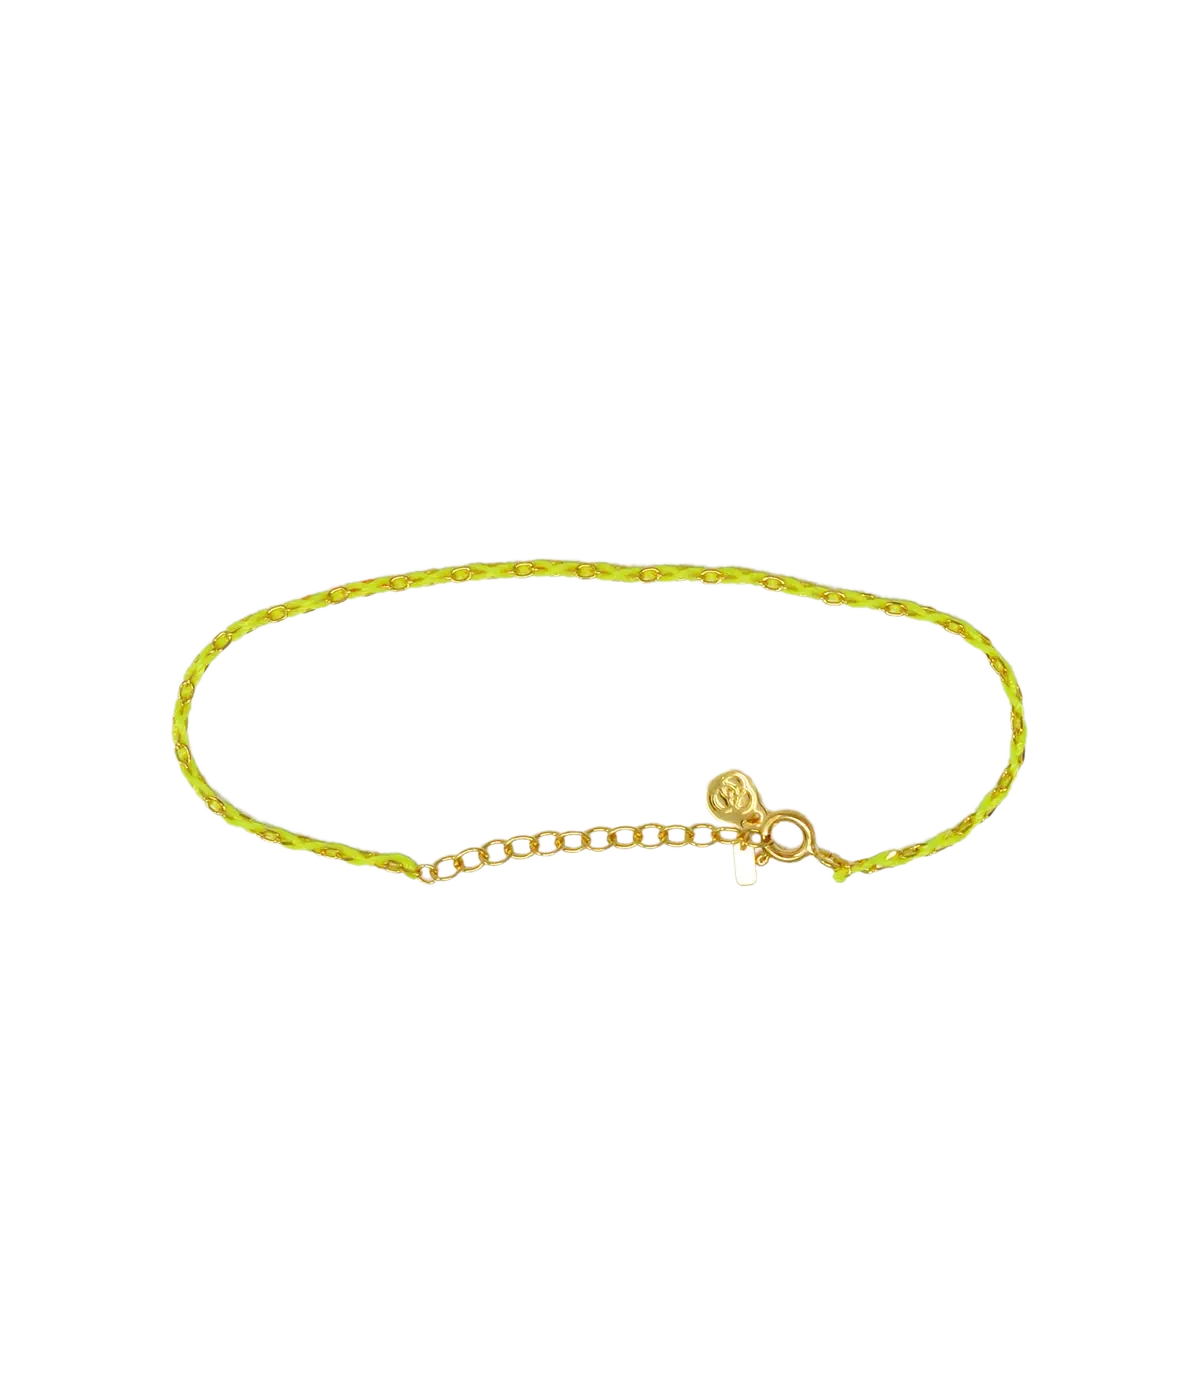 Rook Bracelet in 14K Yellow Gold & Yellow